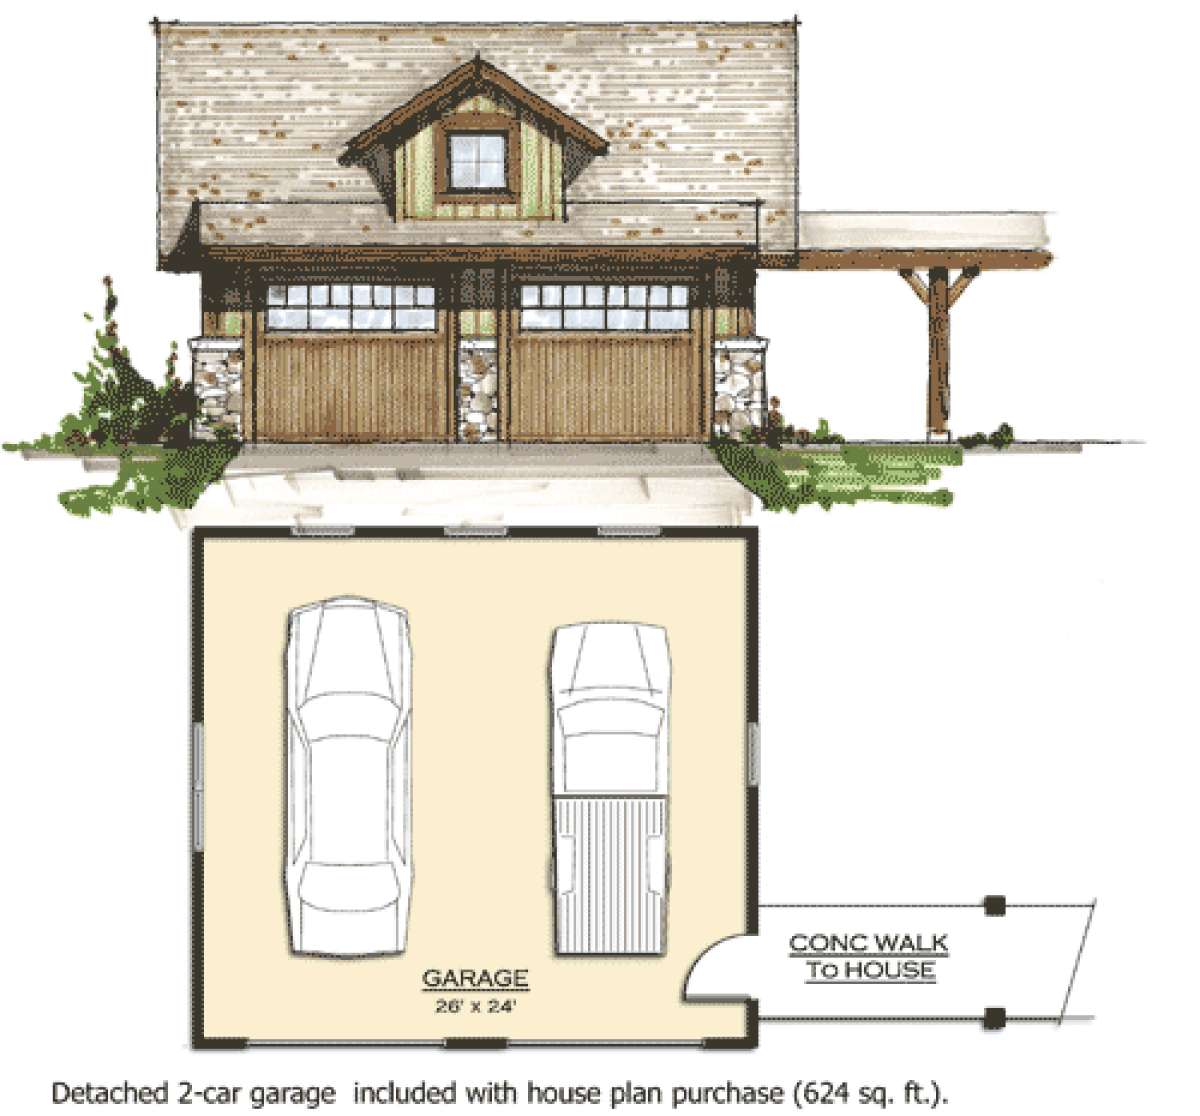 Garage for House Plan #8504-00025